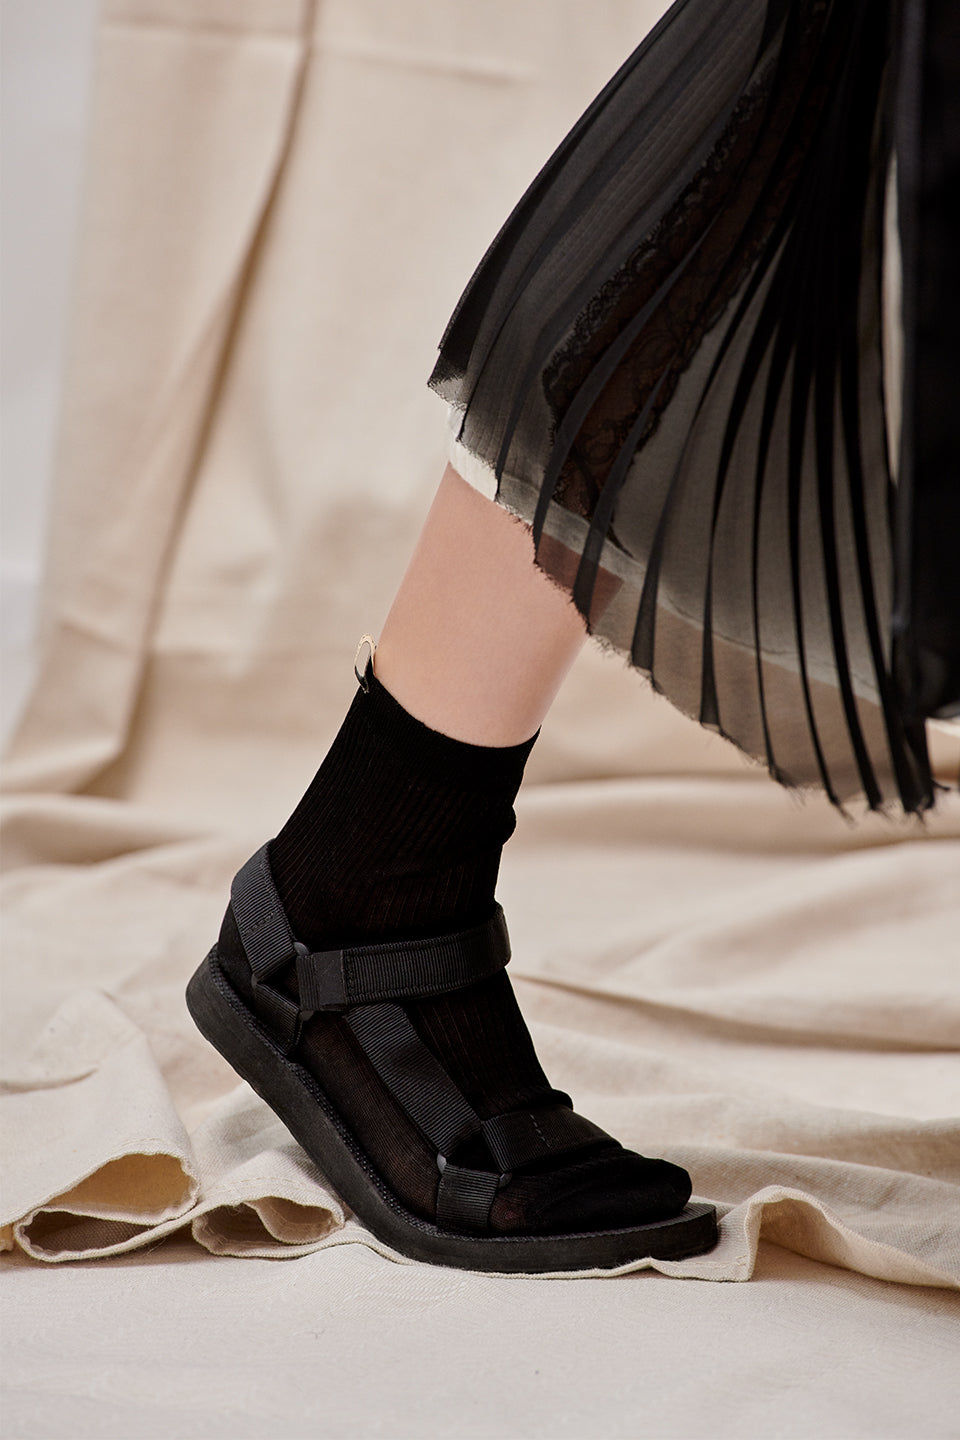 The Agnelli Sock in Black, Egyptian Cotton, with black sandals and a black sheer skirt